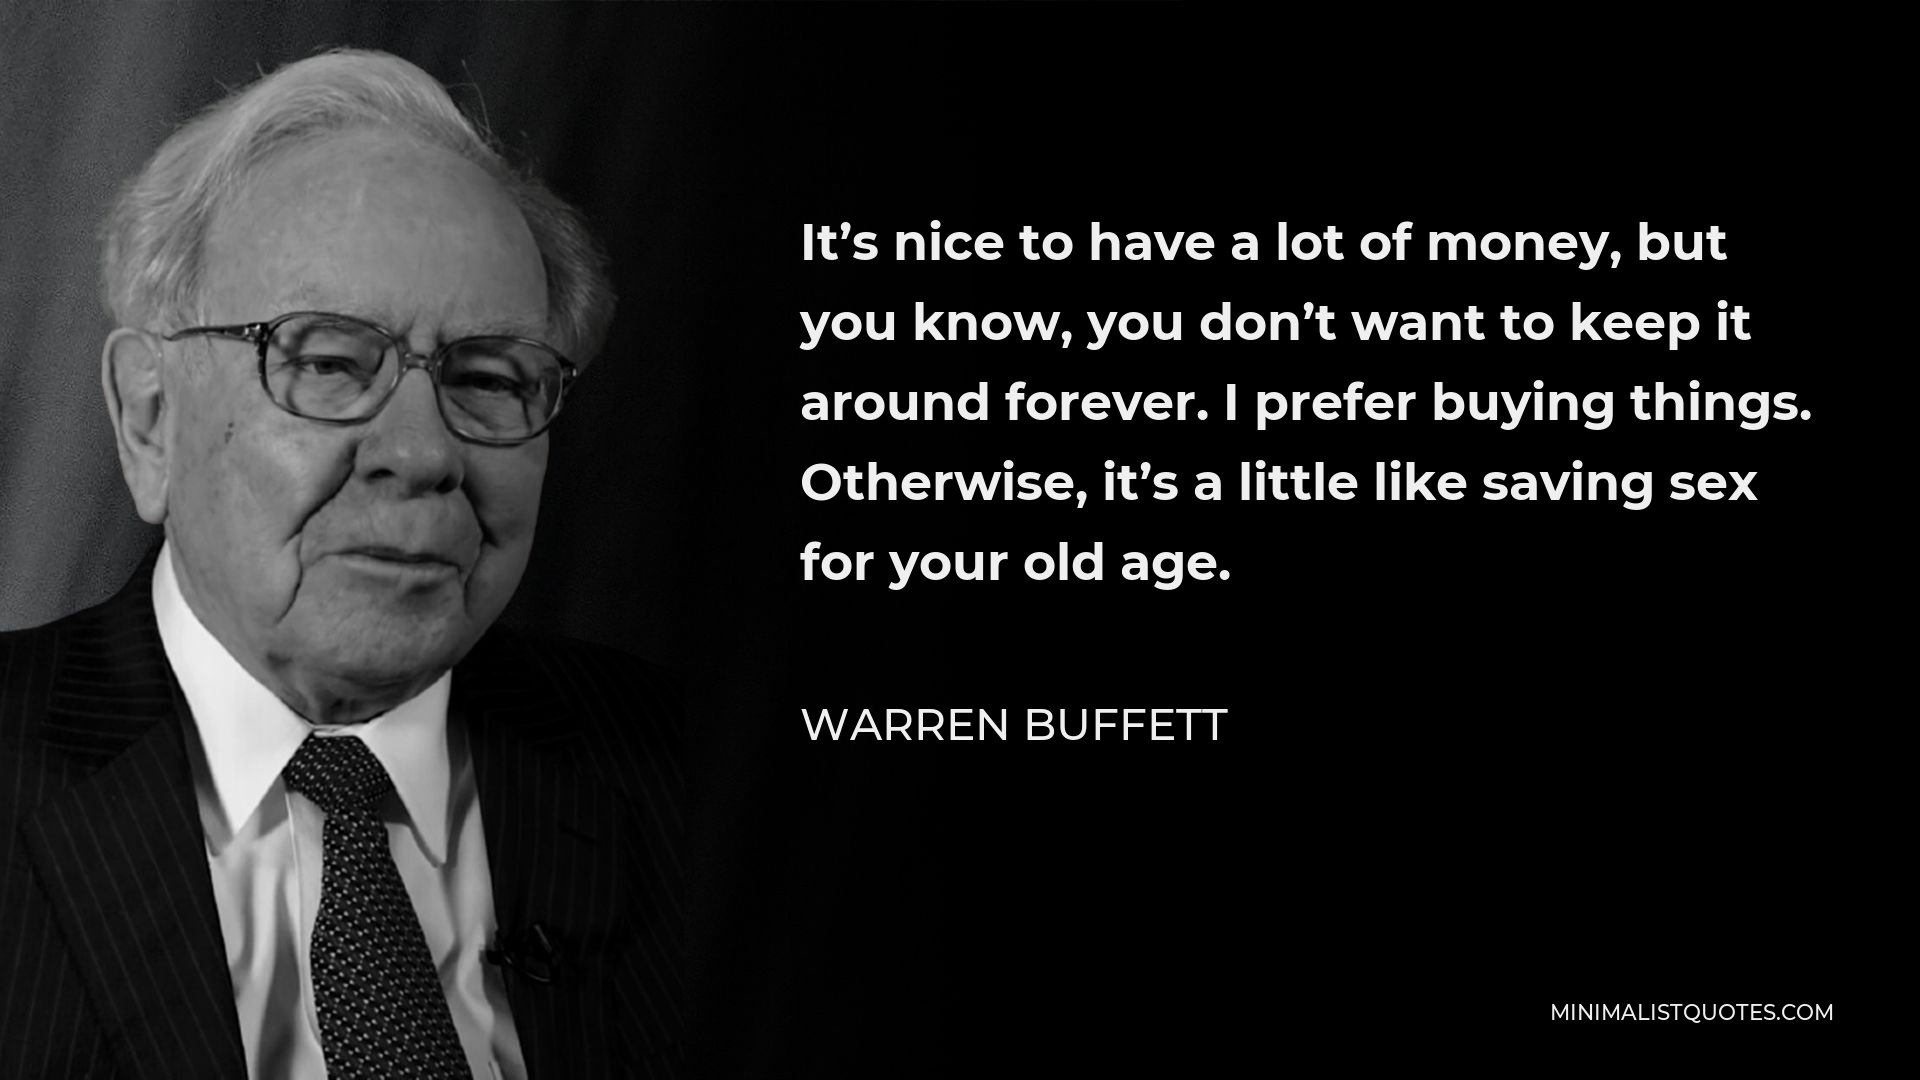 Warren Buffett Quote - It’s nice to have a lot of money, but you know, you don’t want to keep it around forever. I prefer buying things. Otherwise, it’s a little like saving sex for your old age.